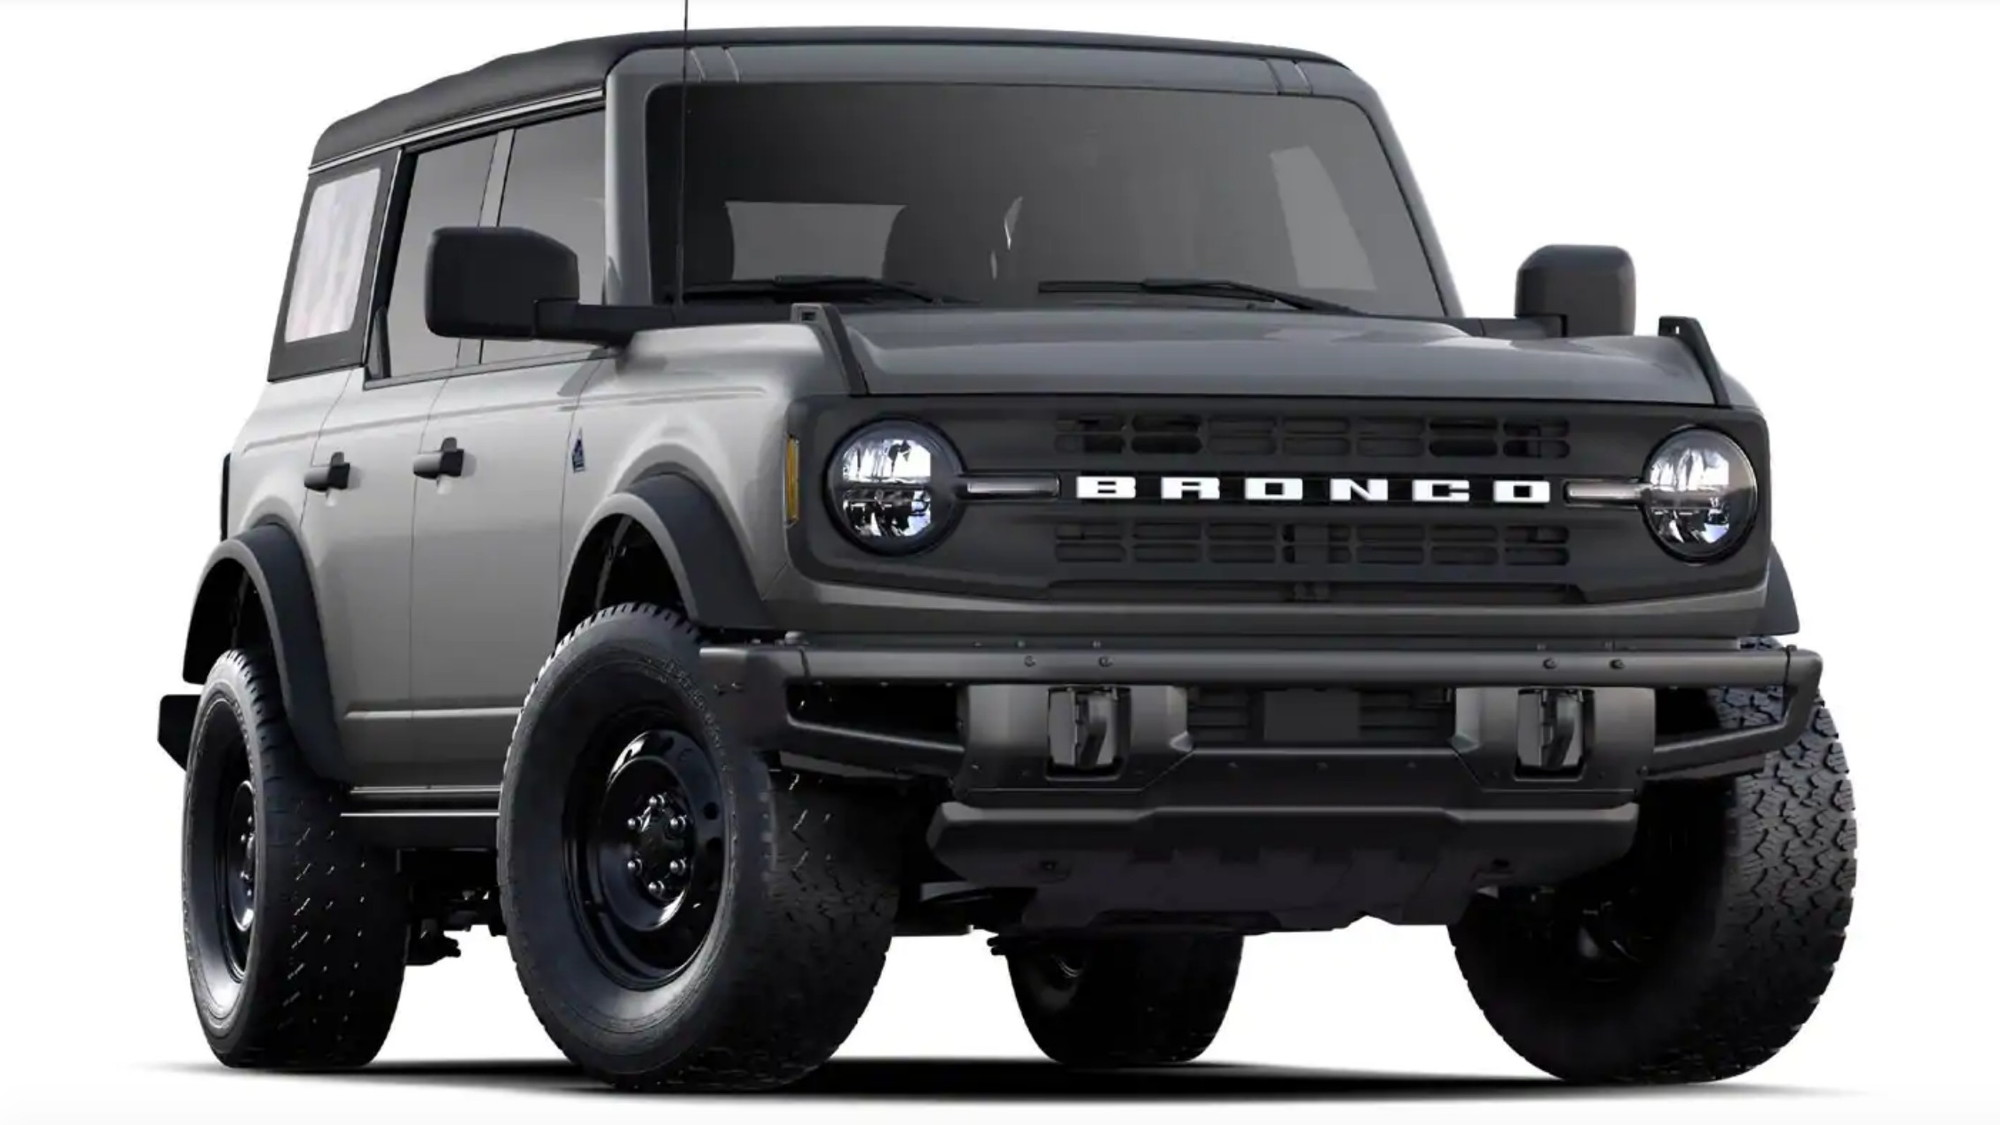 5 ways to build your 2021 Ford Bronco